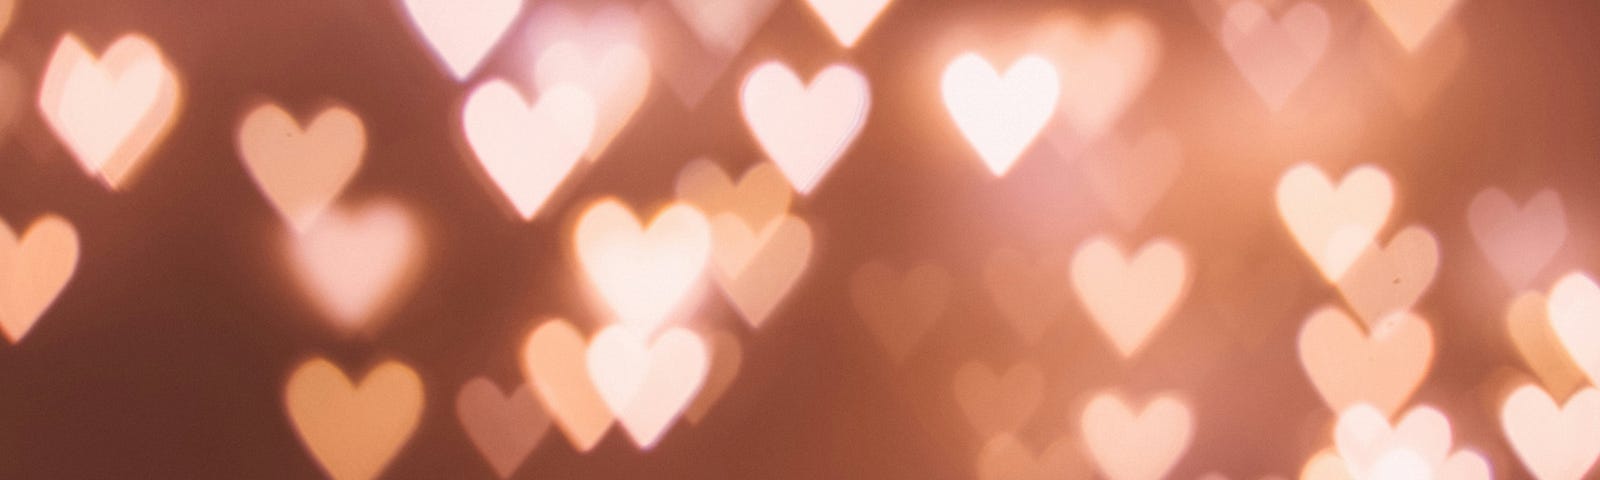 A brownish gold background filled with pale pink and white luminous hearts